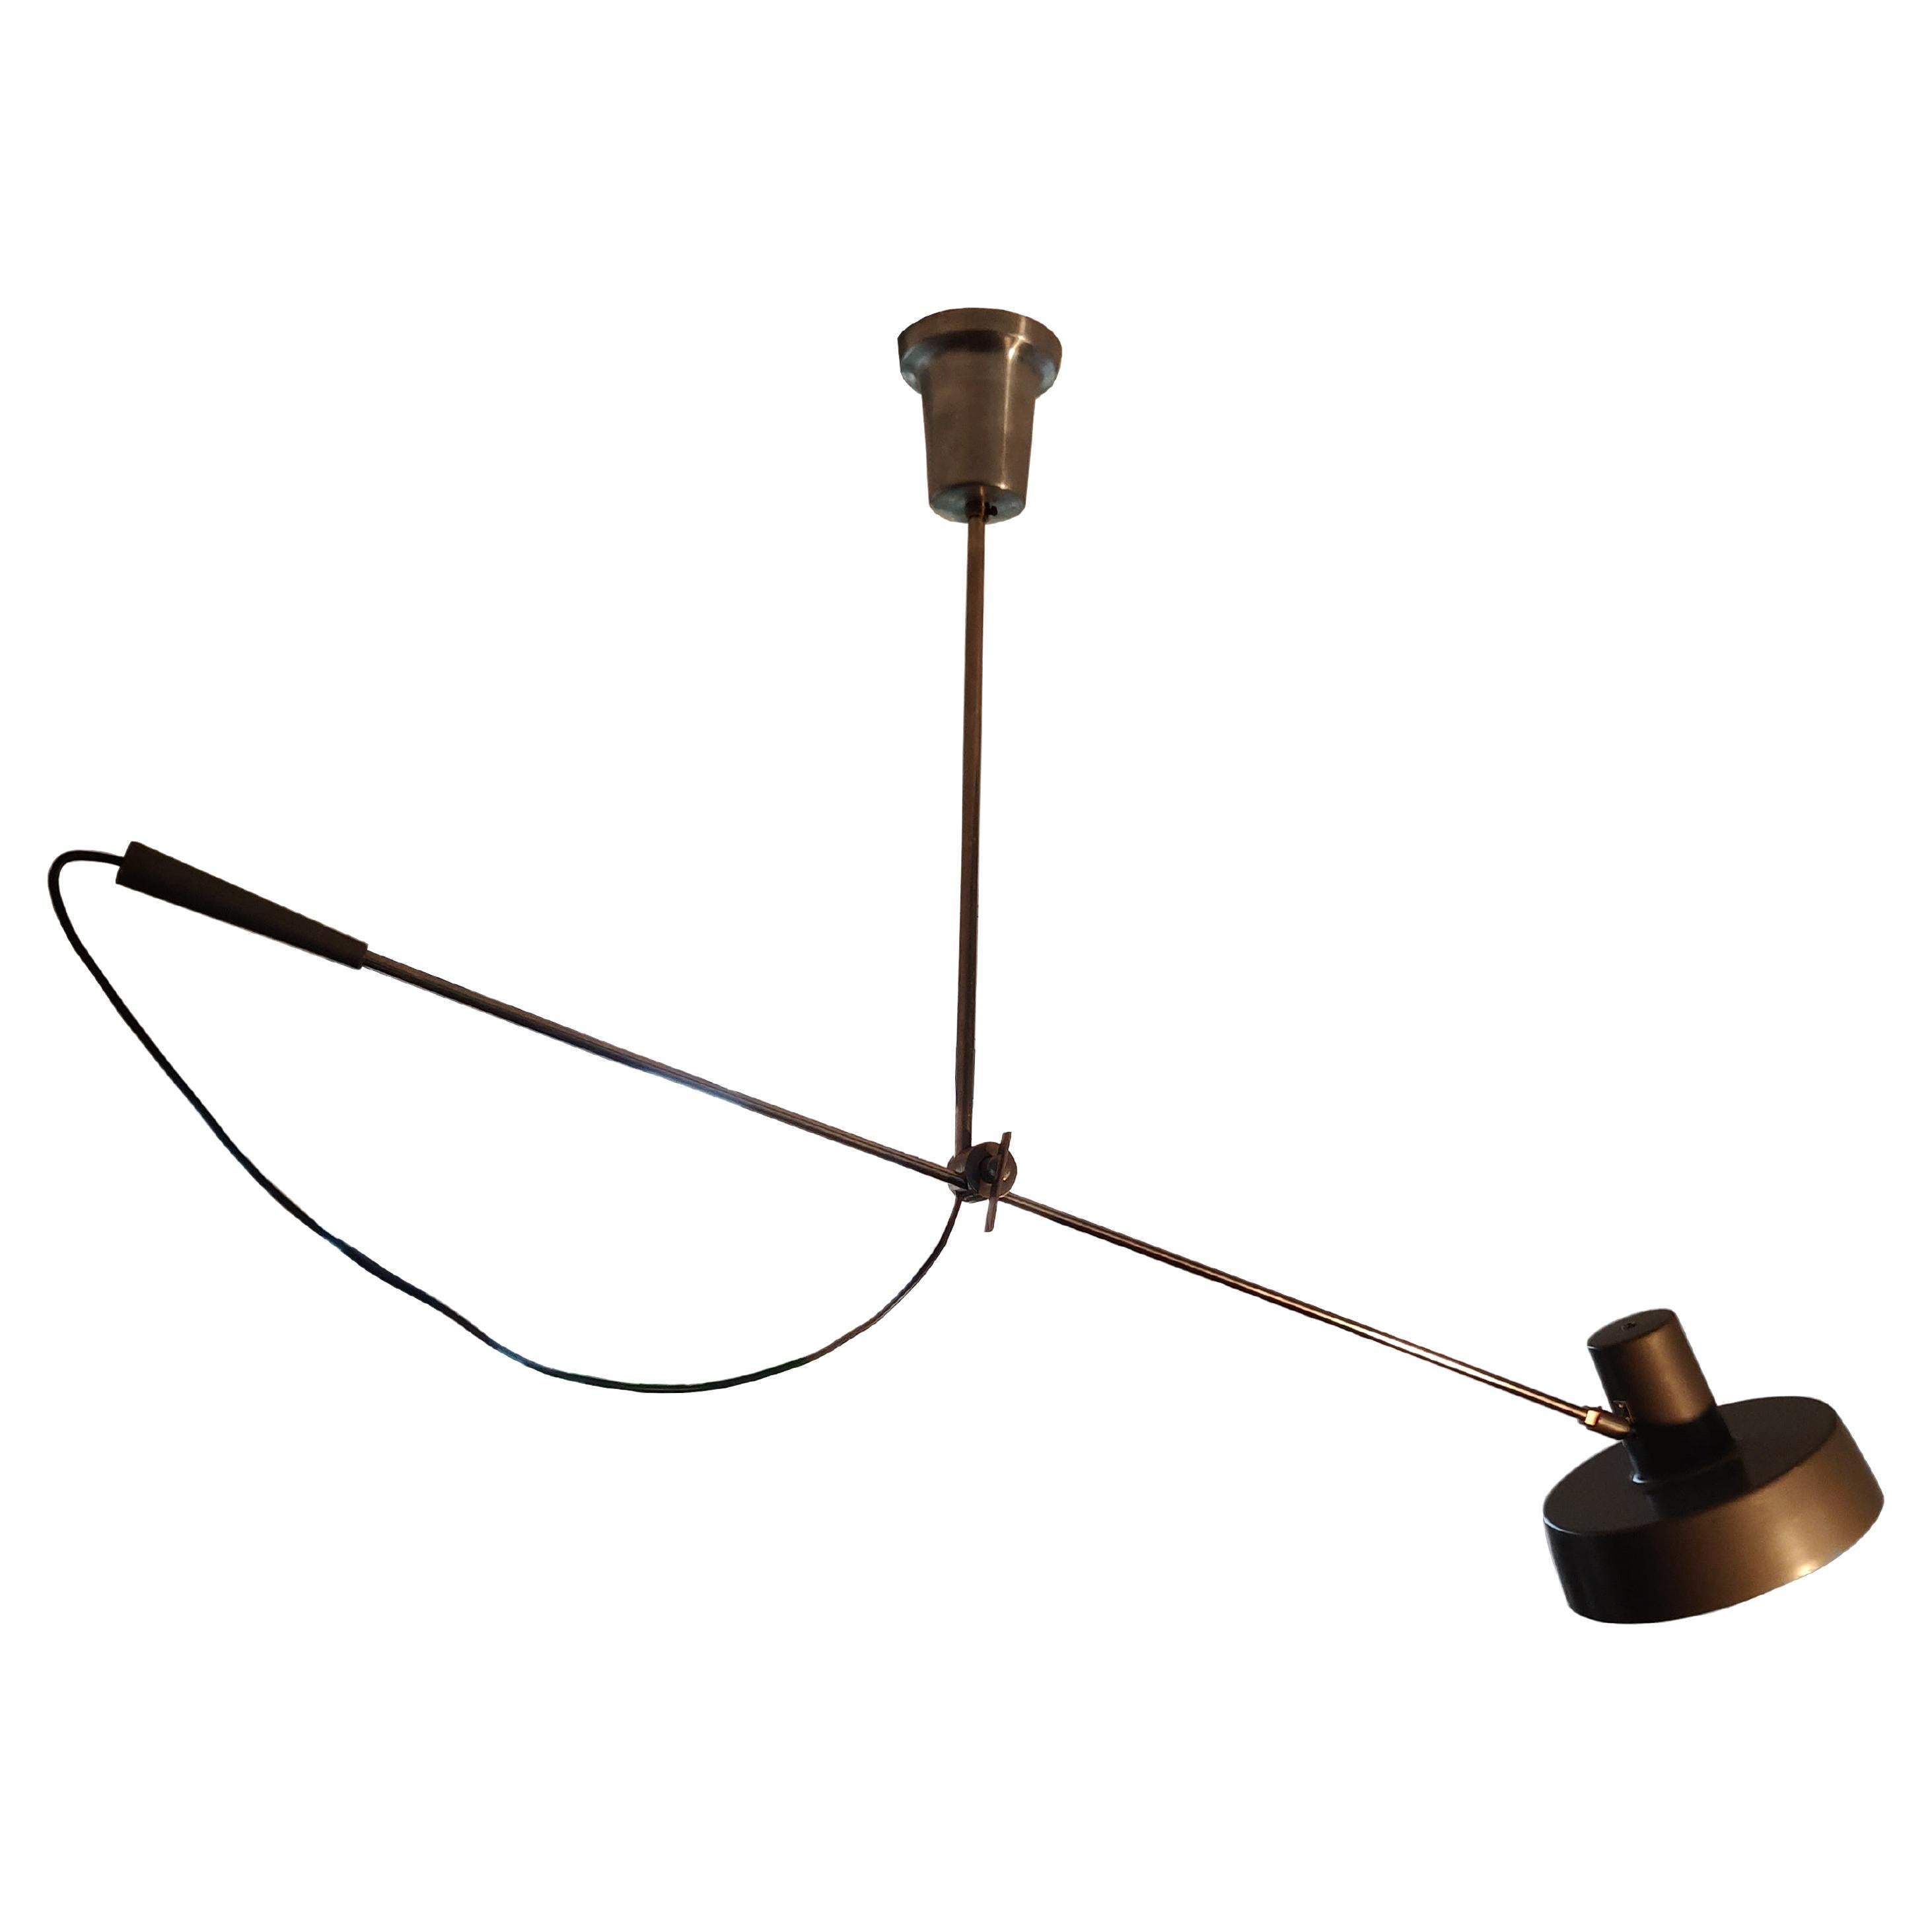 Dutch Ceiling Counter Balance Lamp by Willem Hagoort for Hagoort Lampen, 1960s